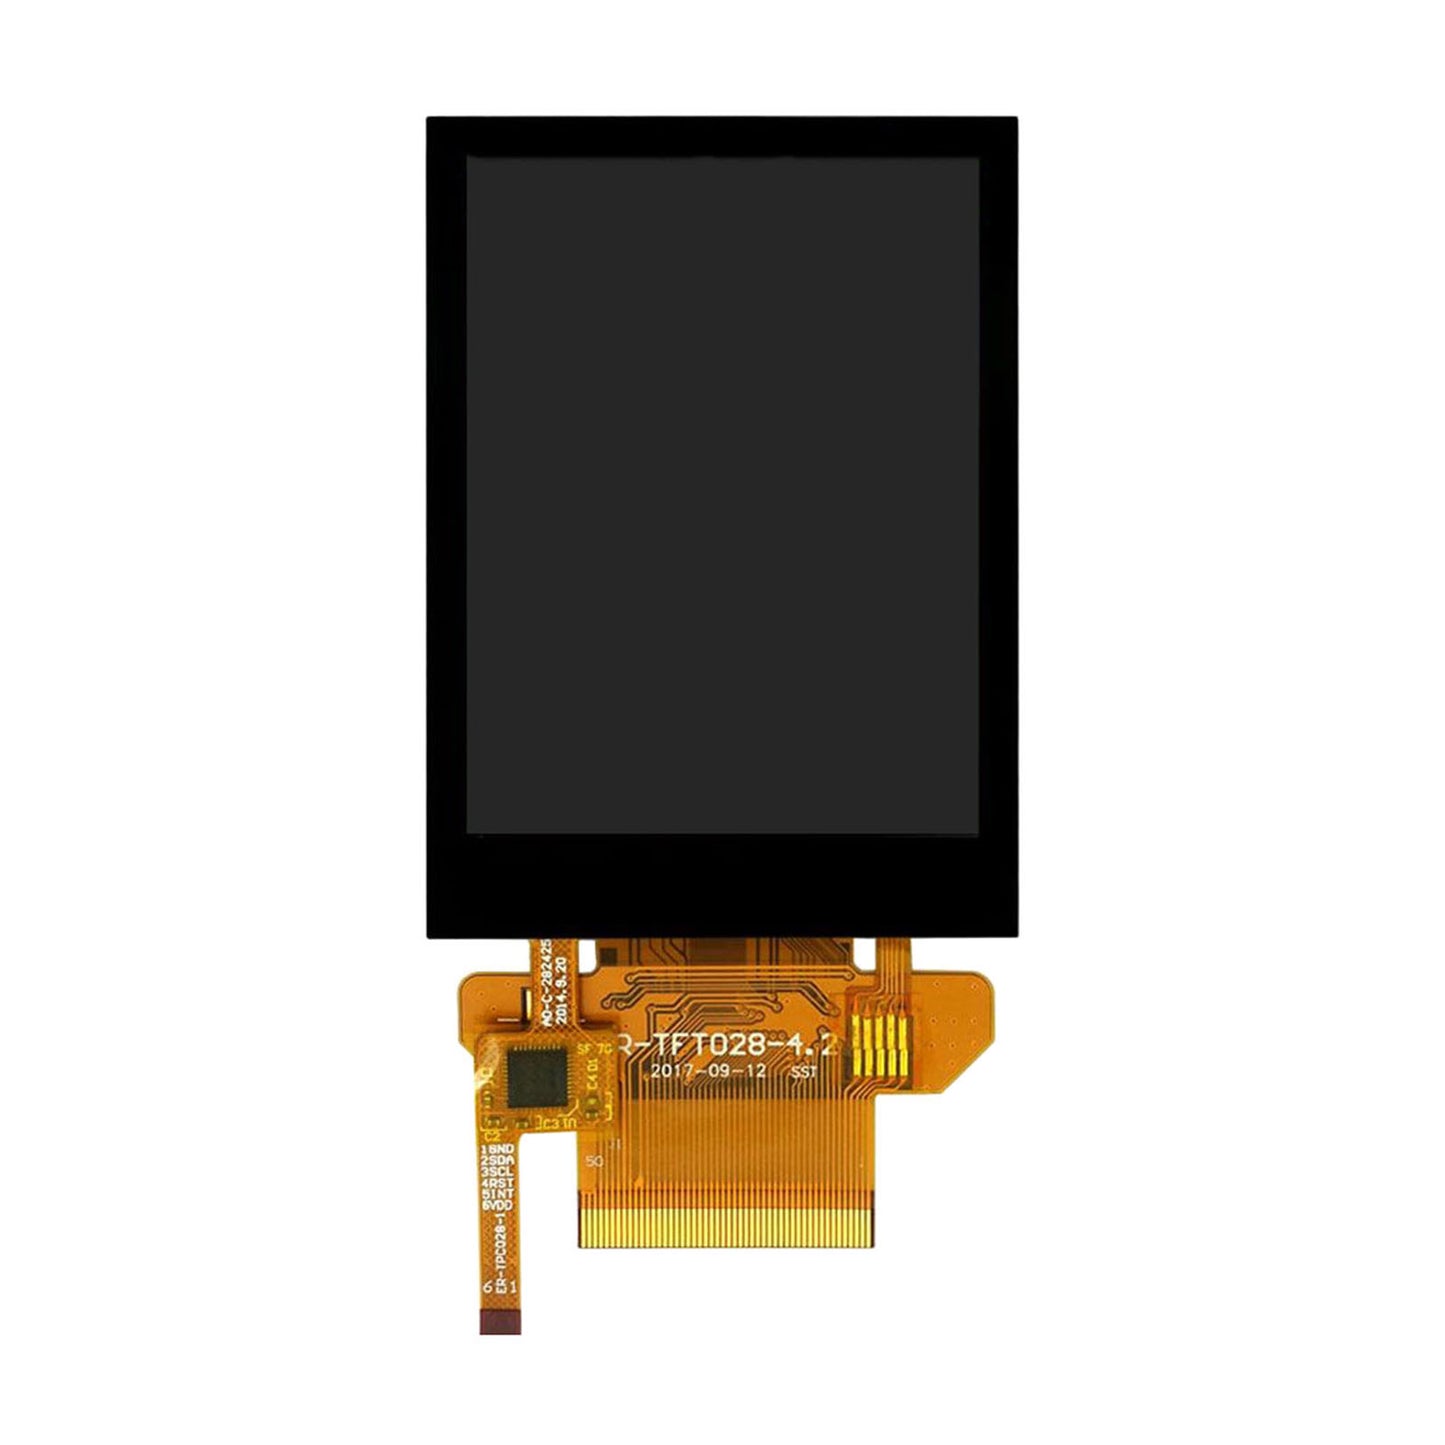 2.8 inch TFT Display Panel with ILI9341 driver and 240x320 resolution, featuring resistive touch capability, utilizing SPI, MCU, and RGB interfaces